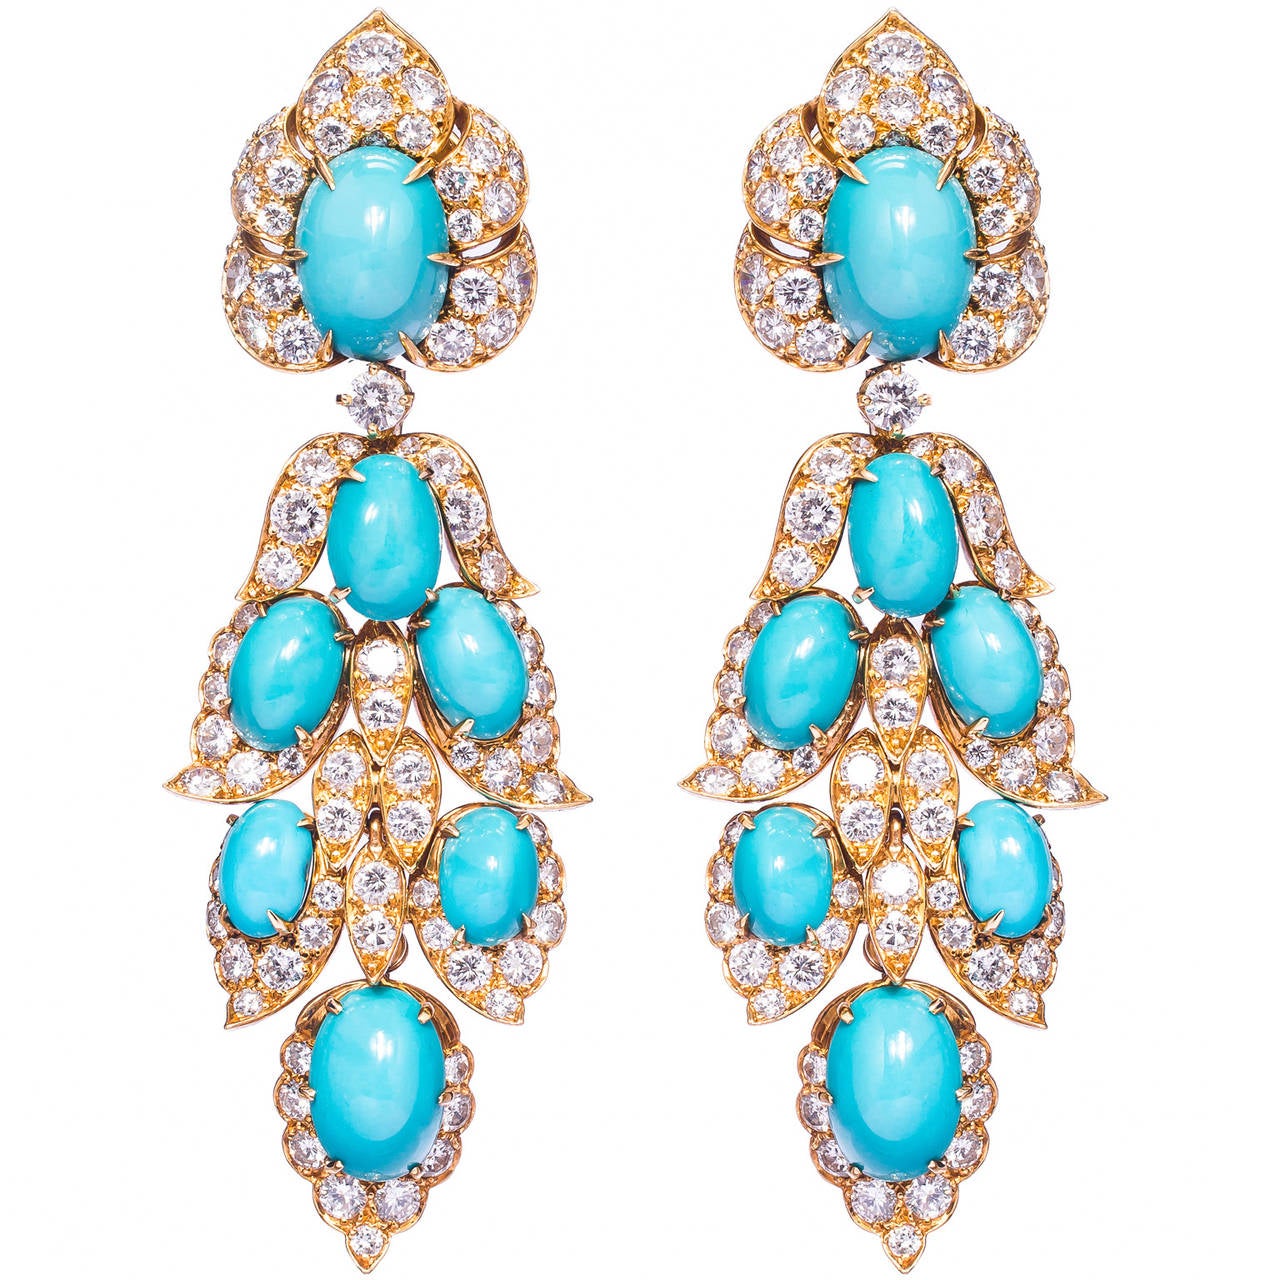 Magnificent 1960s Van Cleef and Arpels Turquoise Diamond Gold Earrings ...